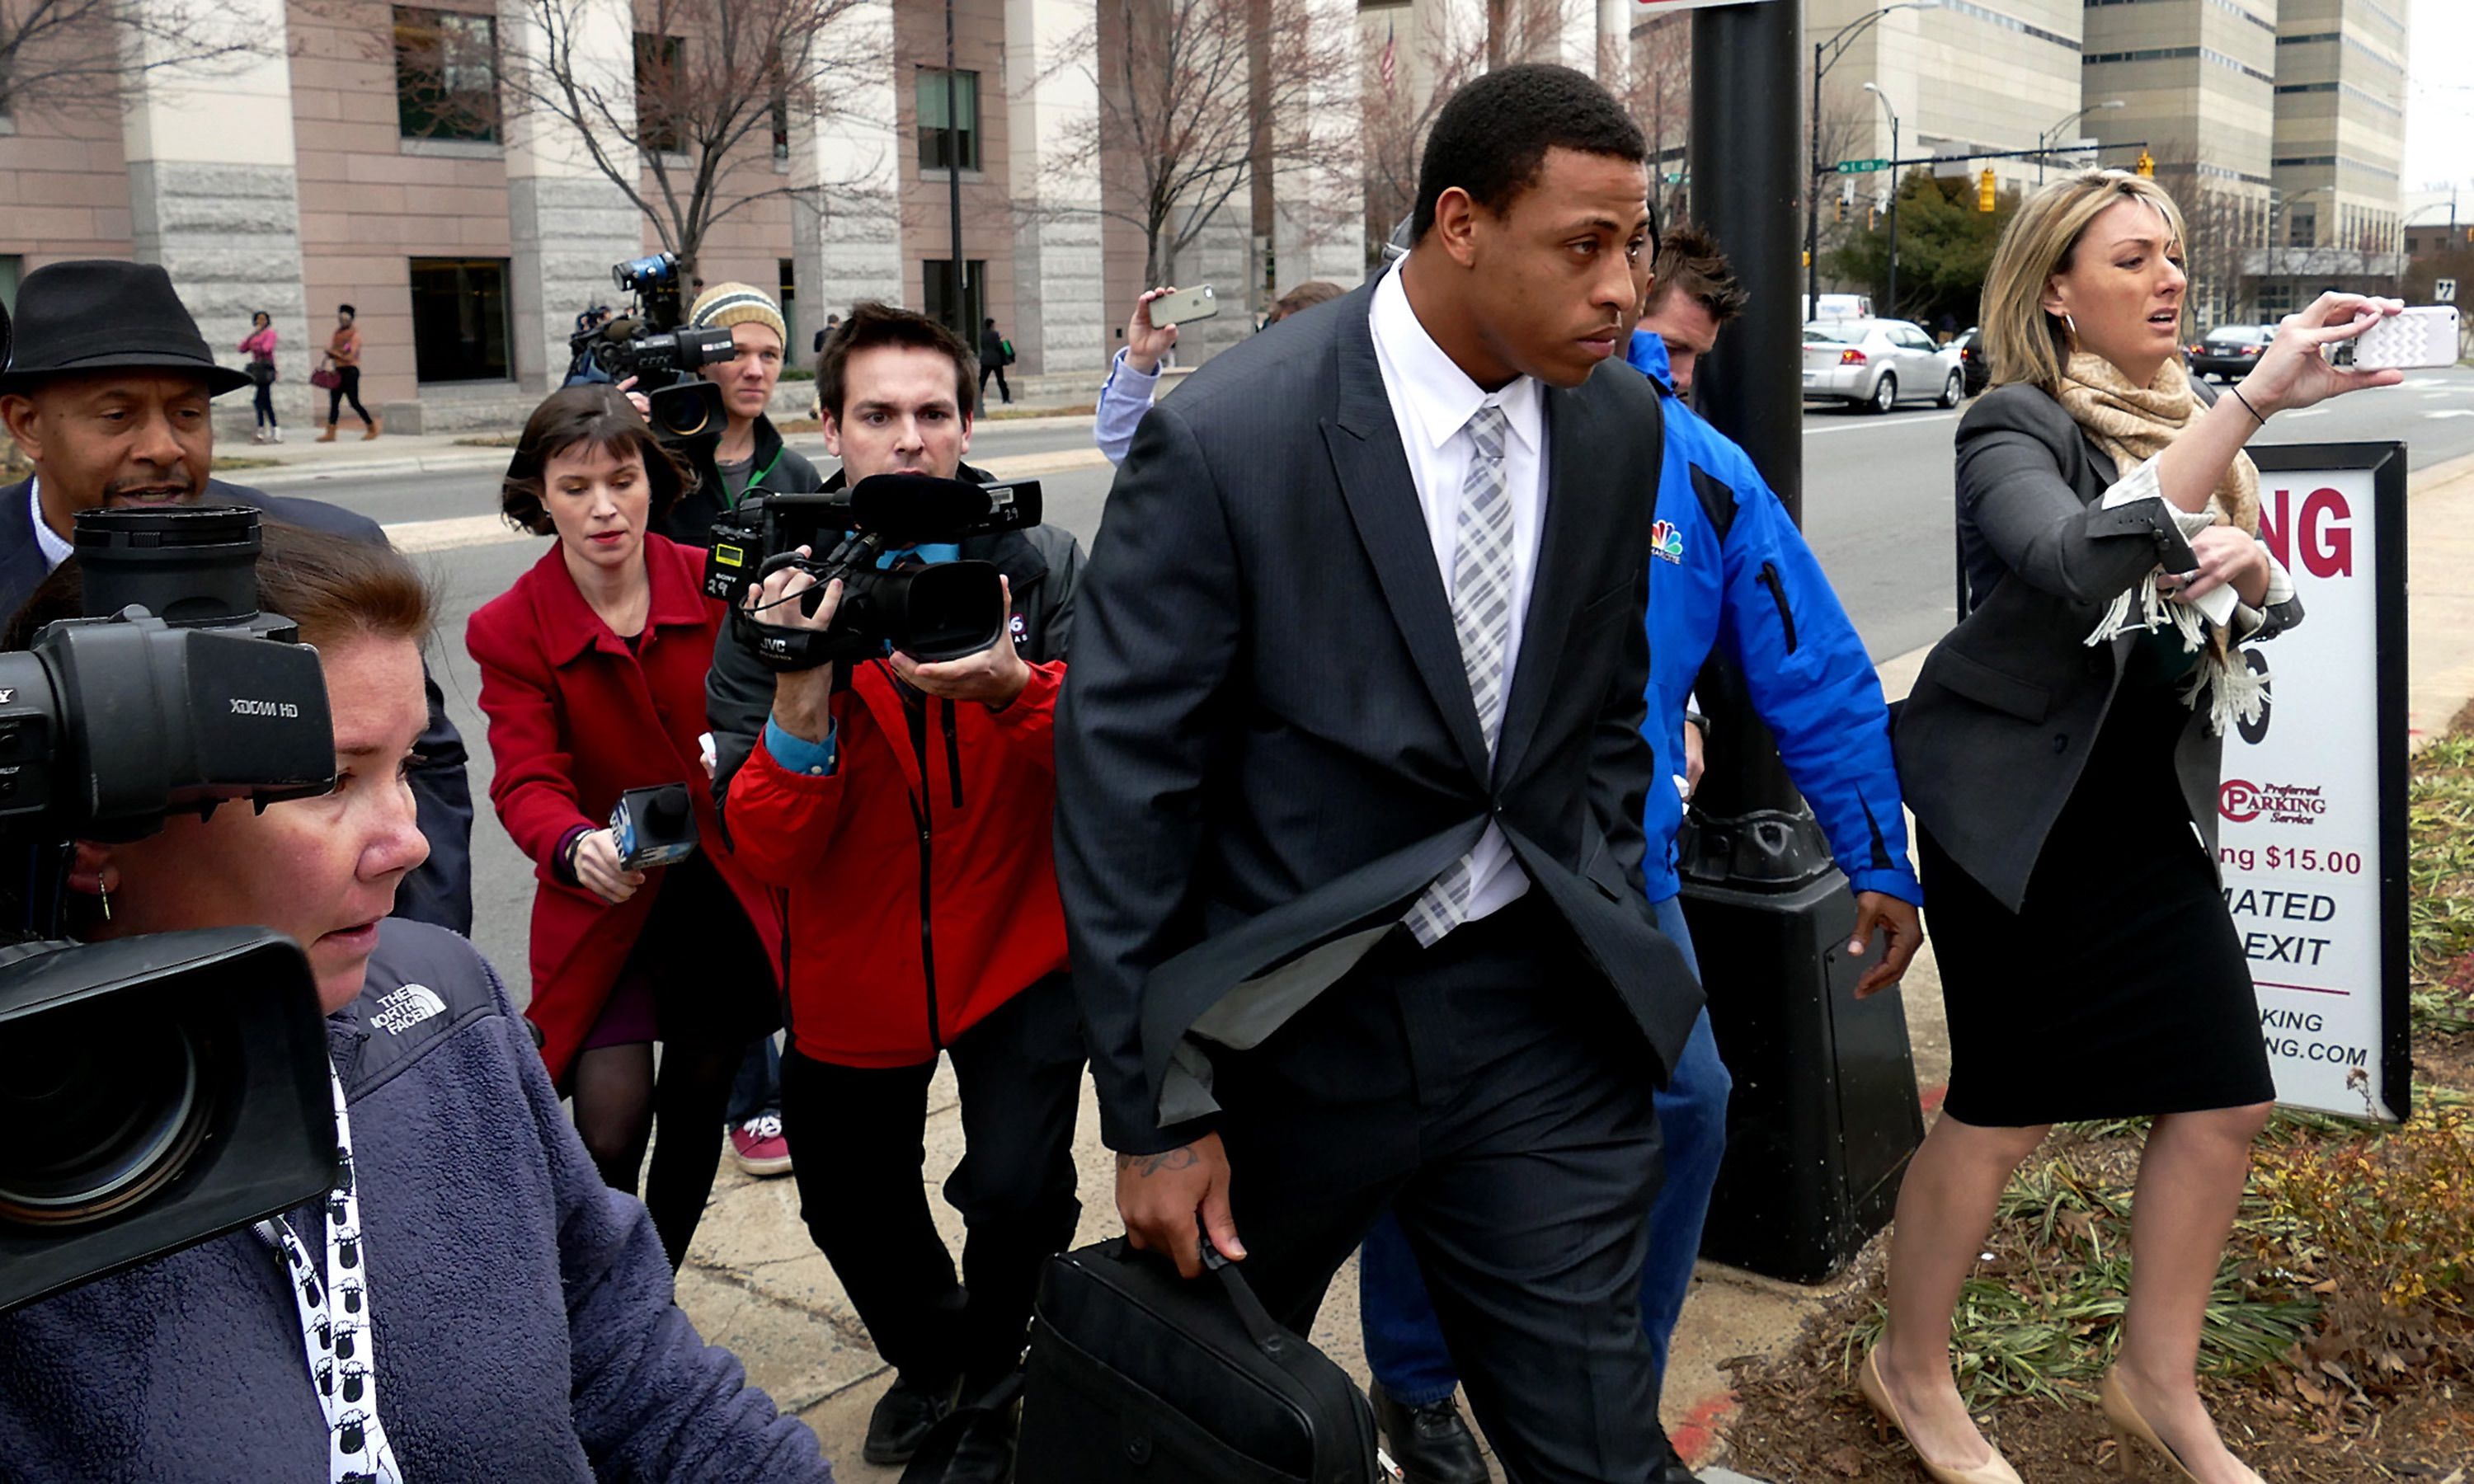 Carolina Panthers defensive end Greg Hardy leaves the Mecklenburg County Courthouse with the media seeking comment on Feb. 9, 2015 in Charlotte, N.C. Hardy&apos;s domestic-abuse case was abruptly dismissed Monday because his accuser is believed to have reached an undisclosed civil settlement with Hardy could not be found to testify. (Jeff Siner/Charlotte Observer/TNS)